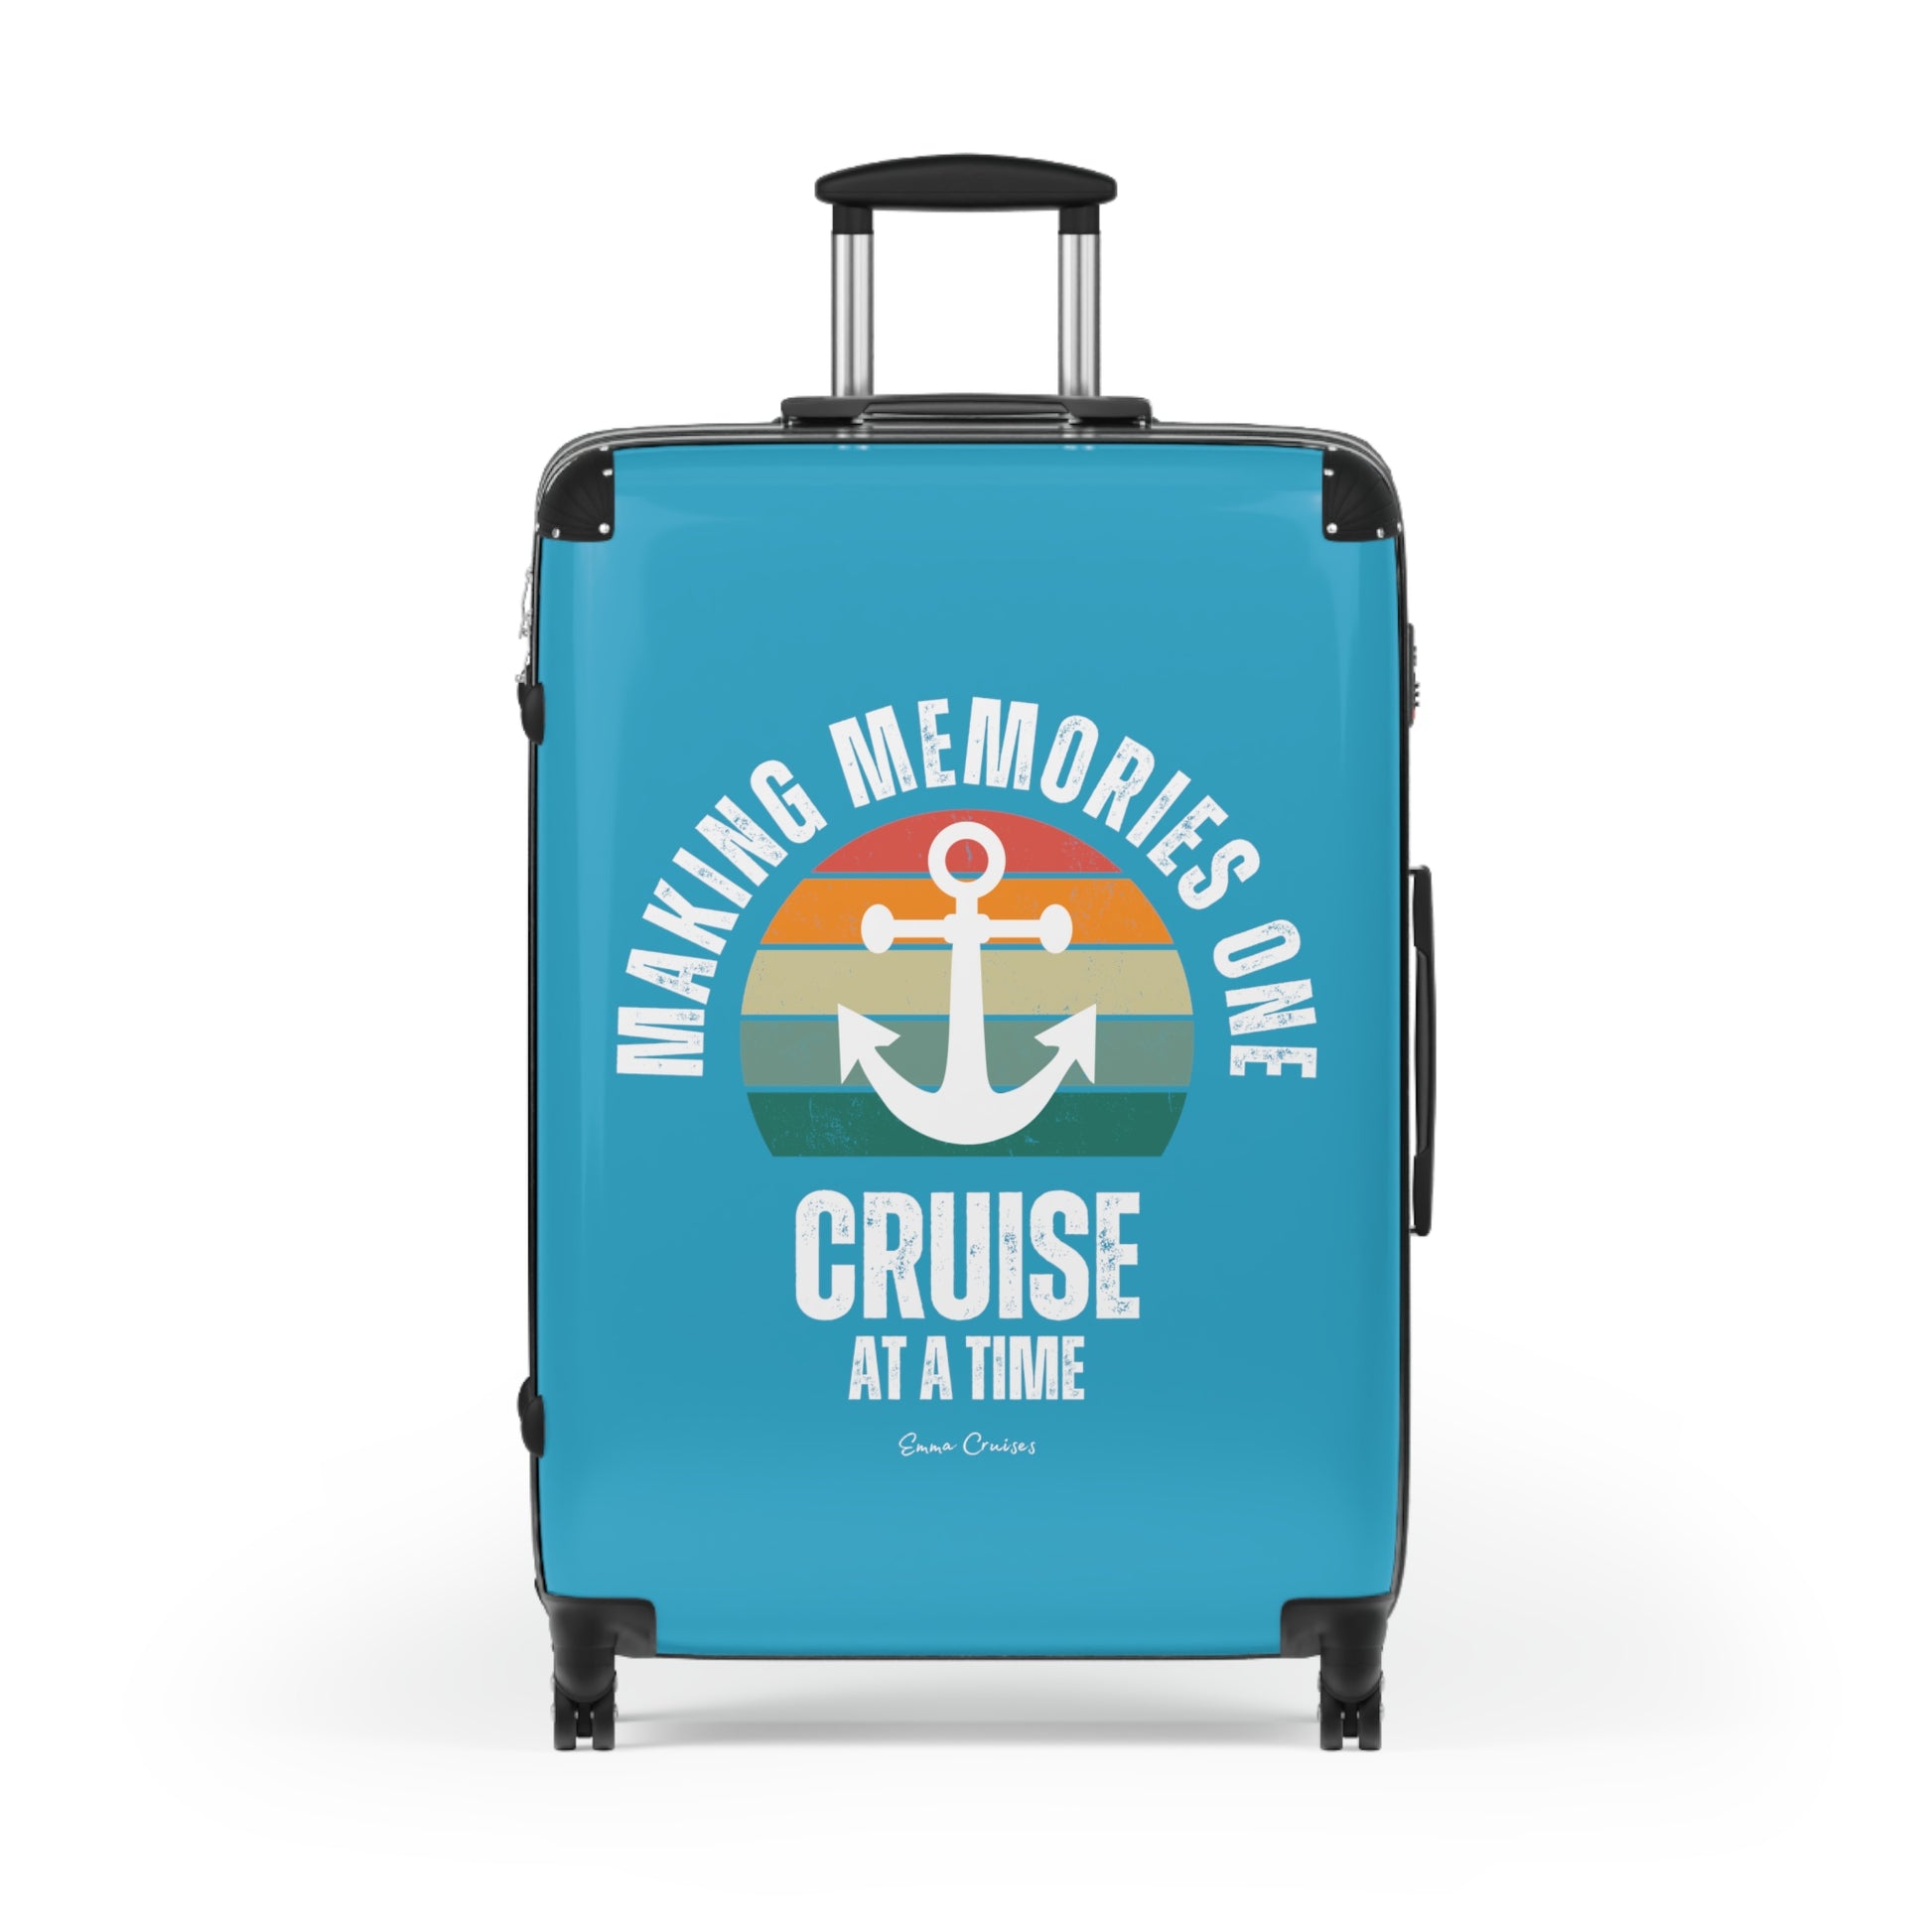 Making Memories One Cruise at a Time - Bag – Emma Cruises